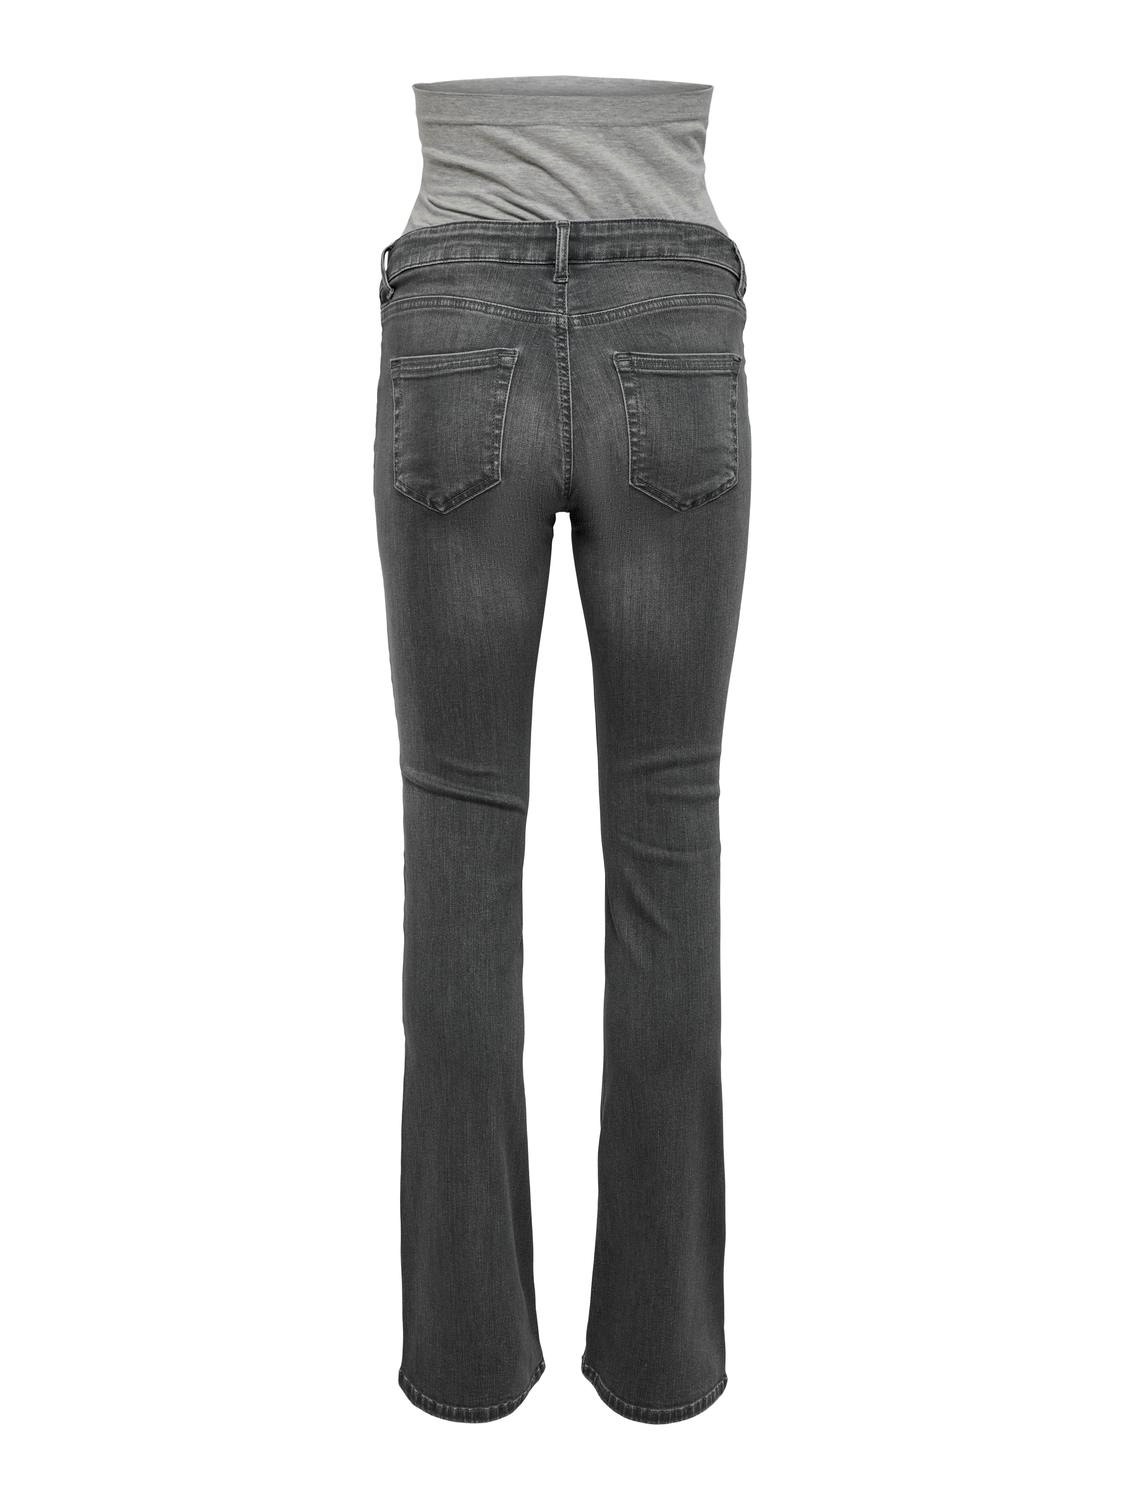 ONLY Flared fit Jeans -Grey Denim - 15258926